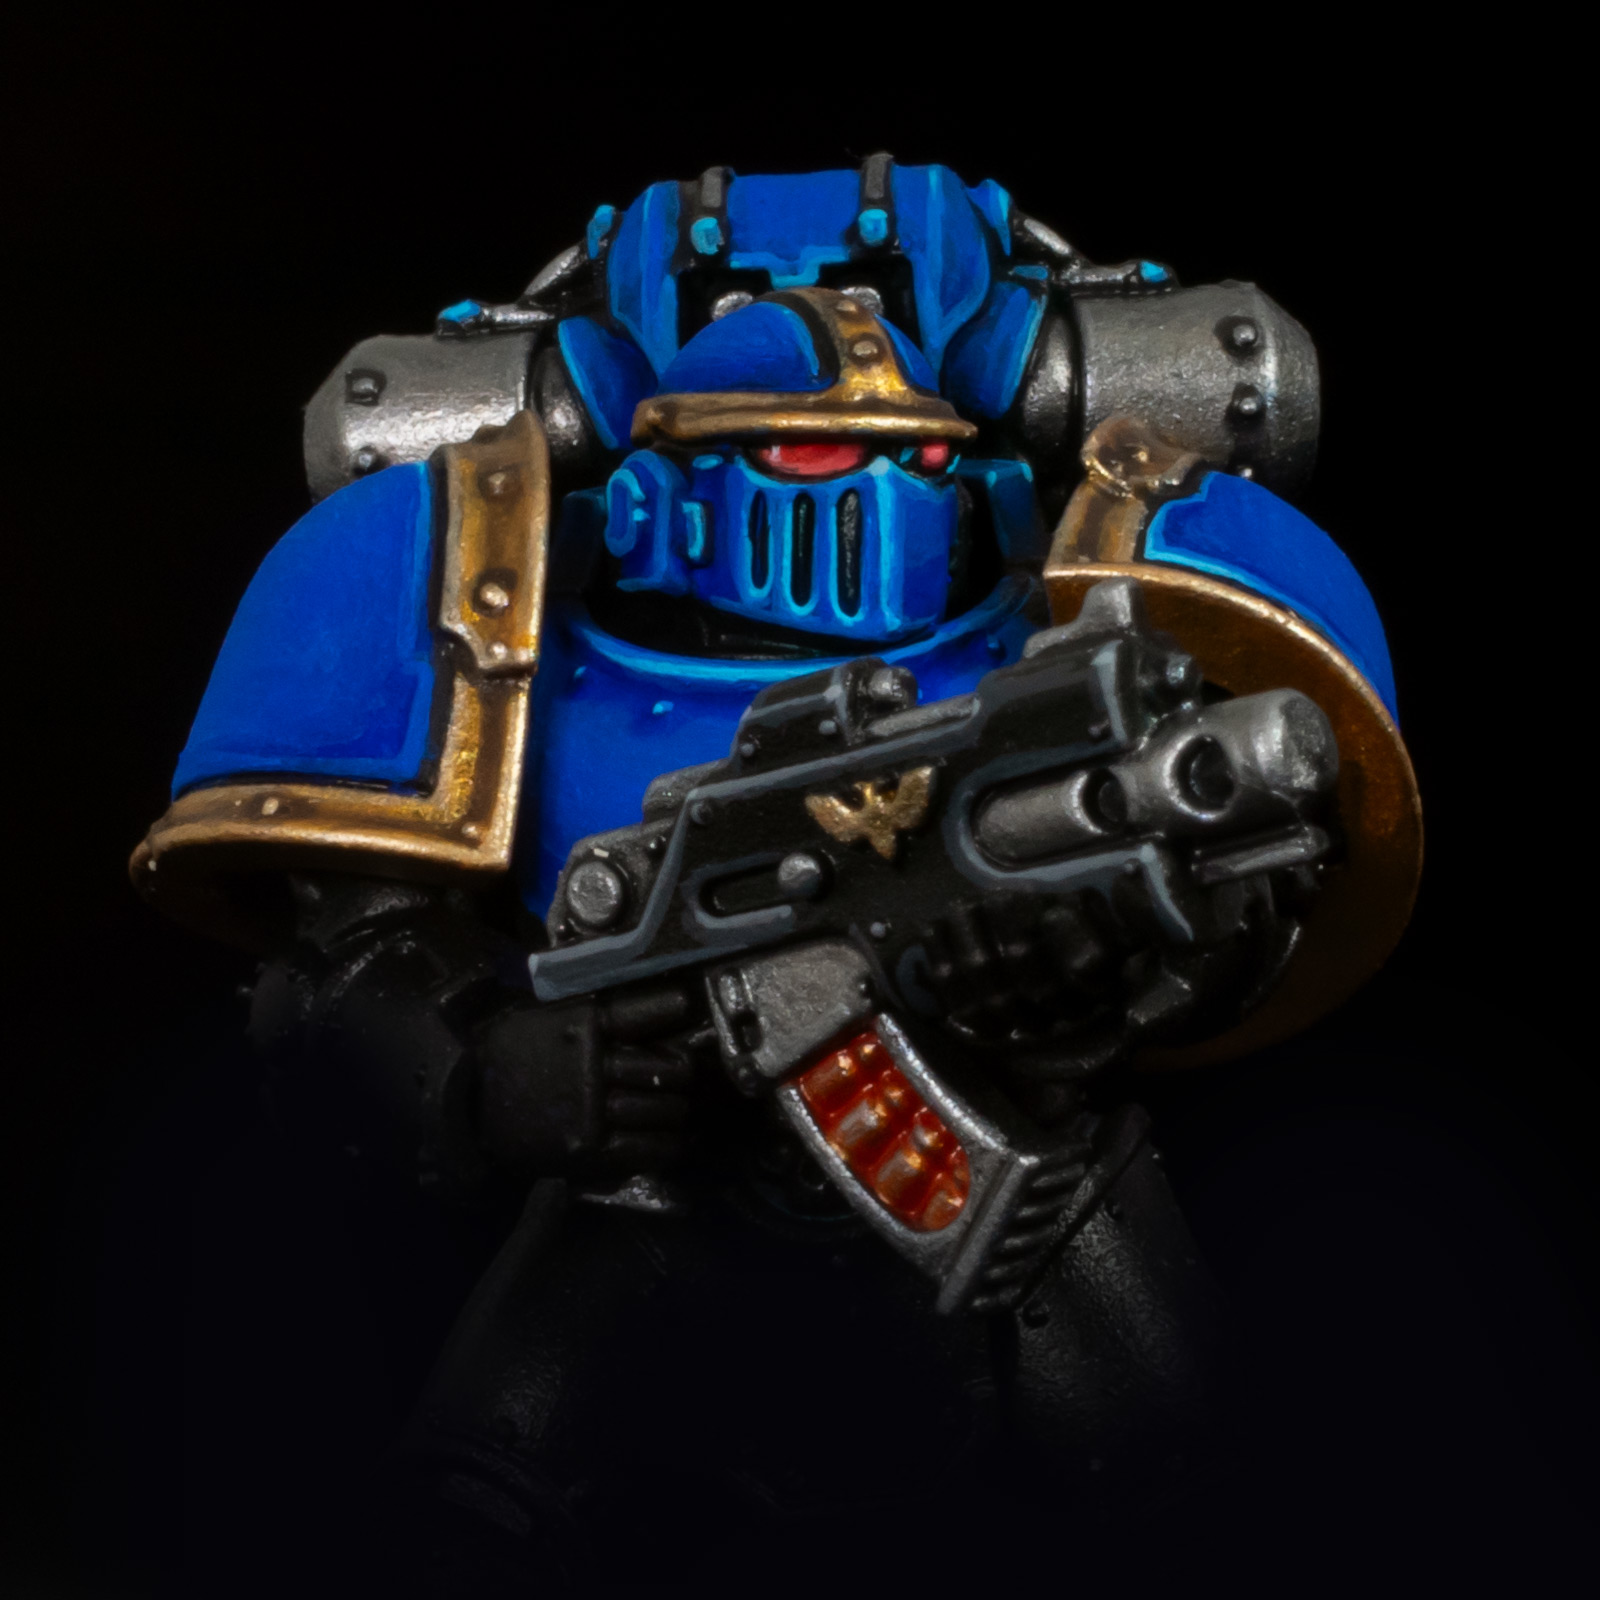 Horus Heresy era Ultramarine in MkIII armour, painted with AK 3rd Gen paints